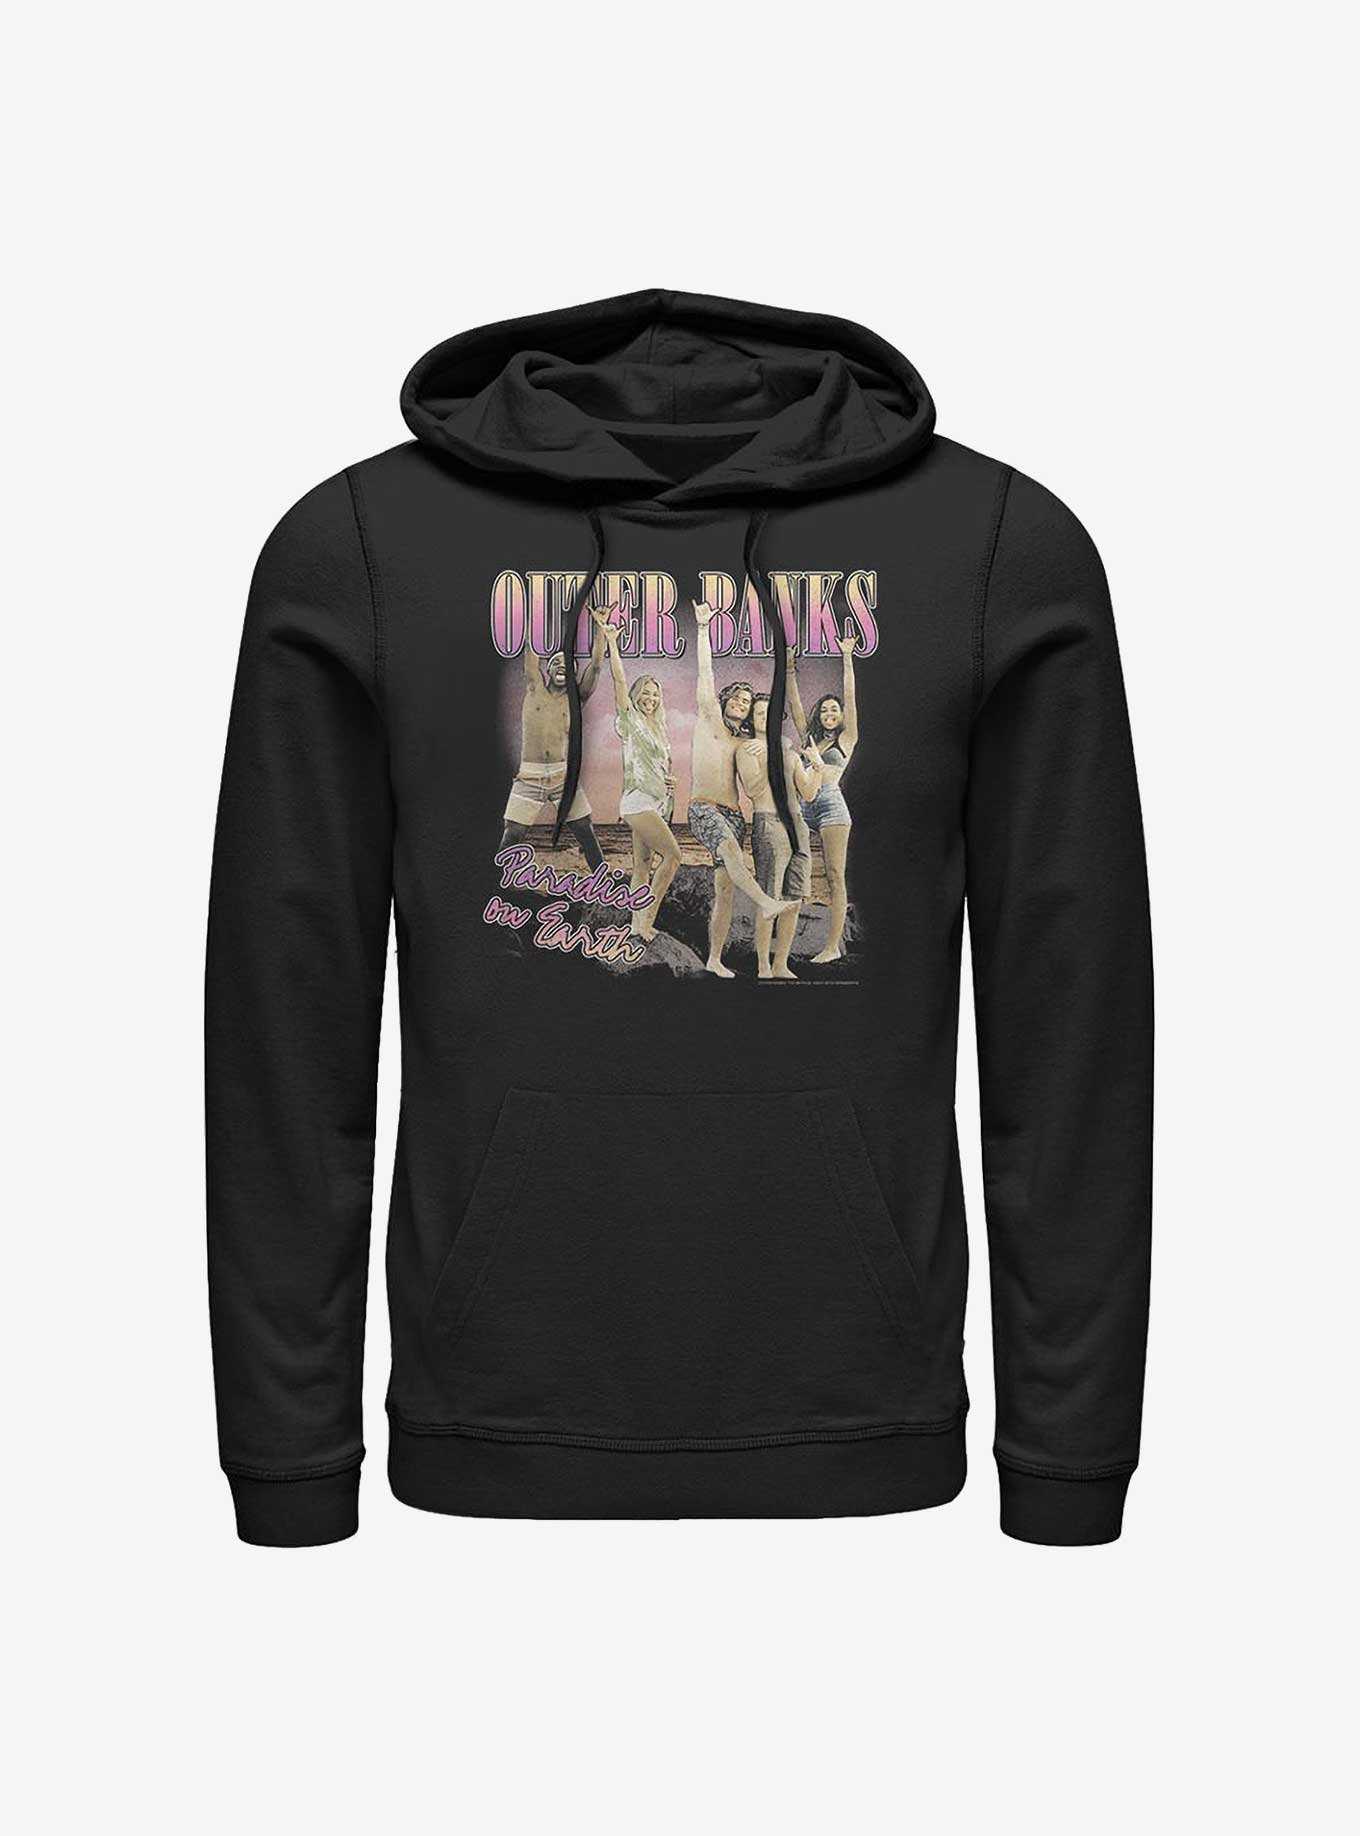 Outer Banks Pogue Squad Hoodie, , hi-res